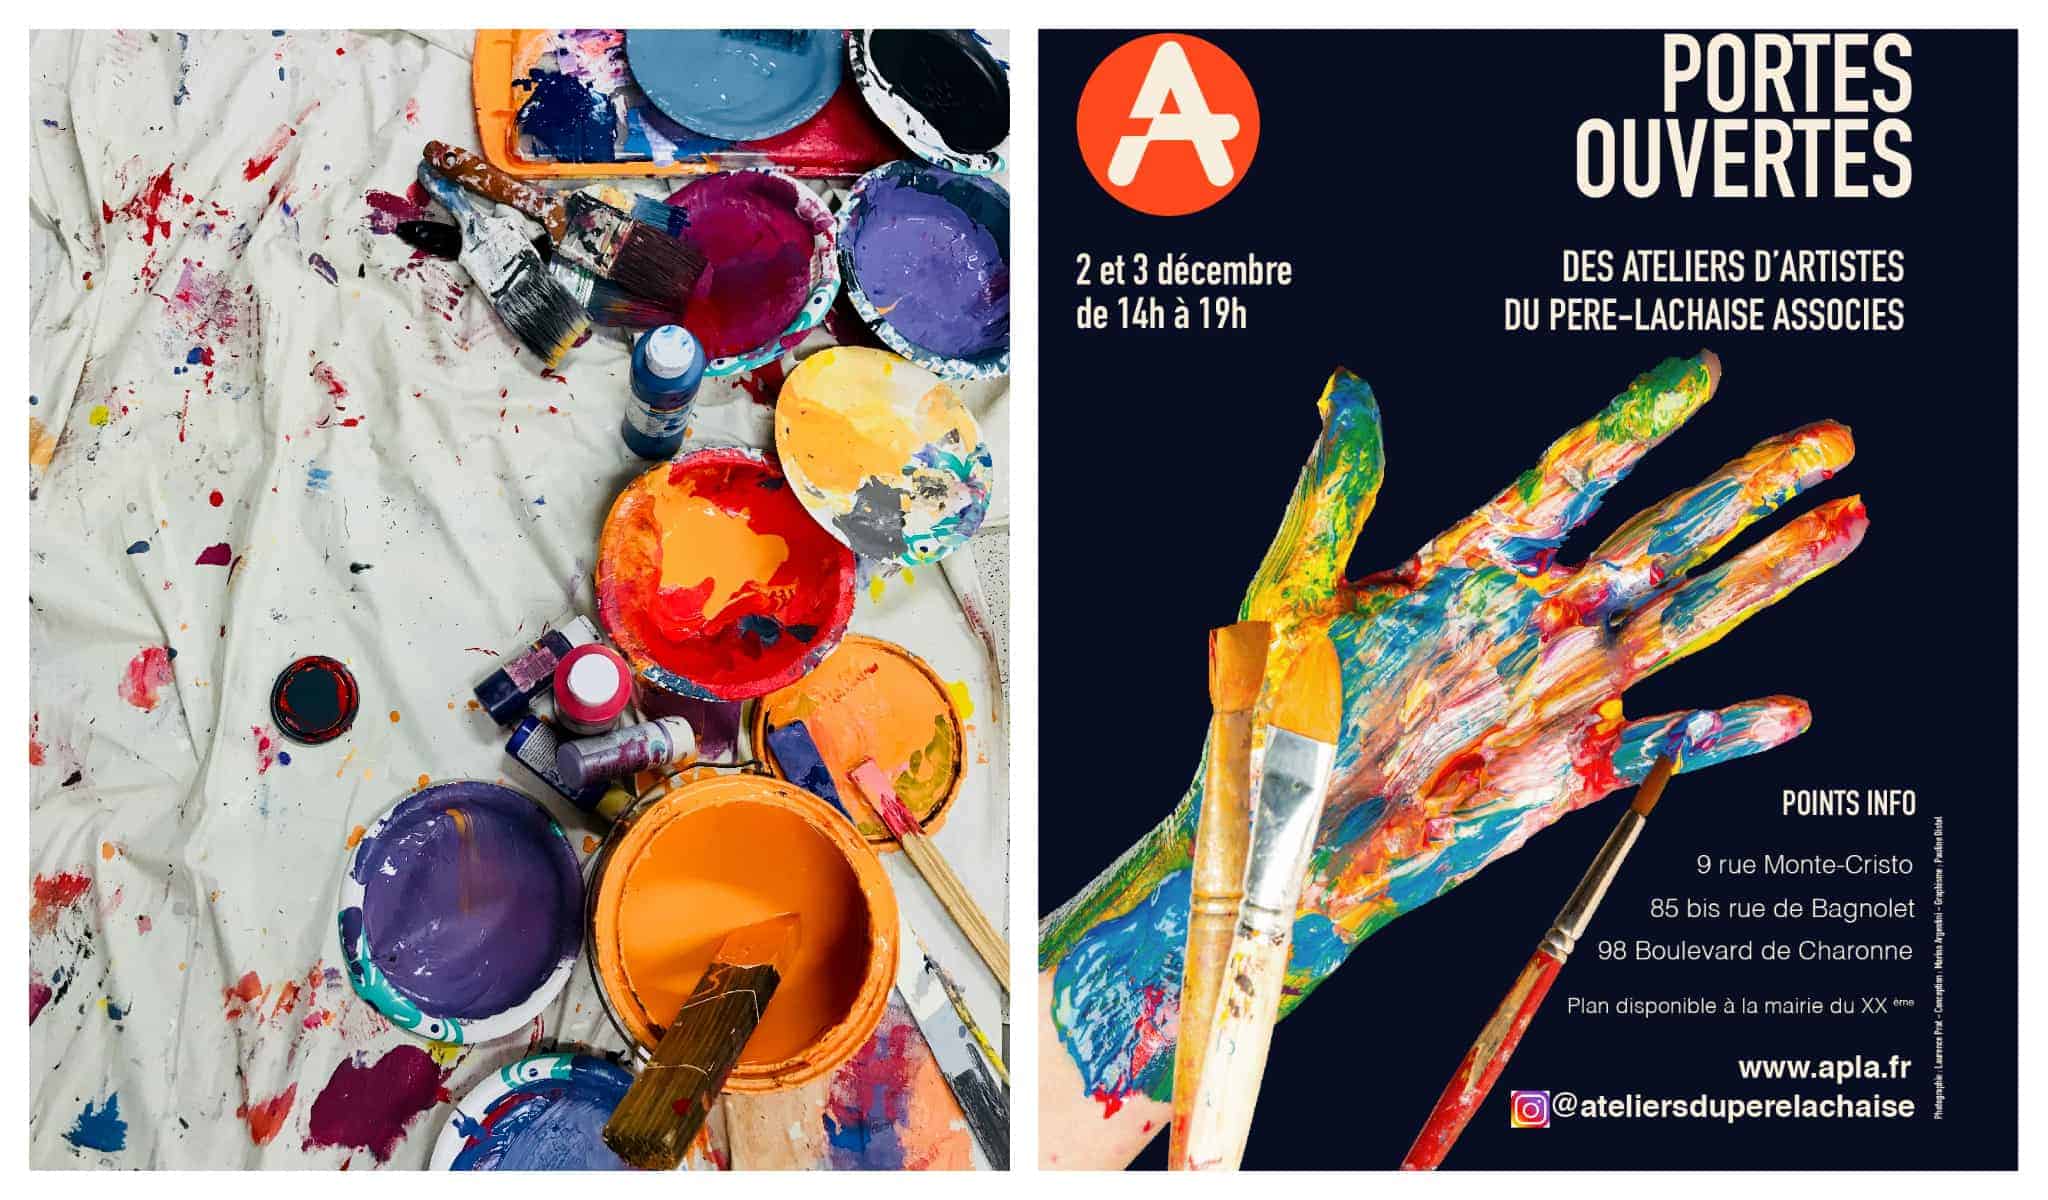 left: colours splotched by an artists, right: a leaflet for open artists studios event in Paris 